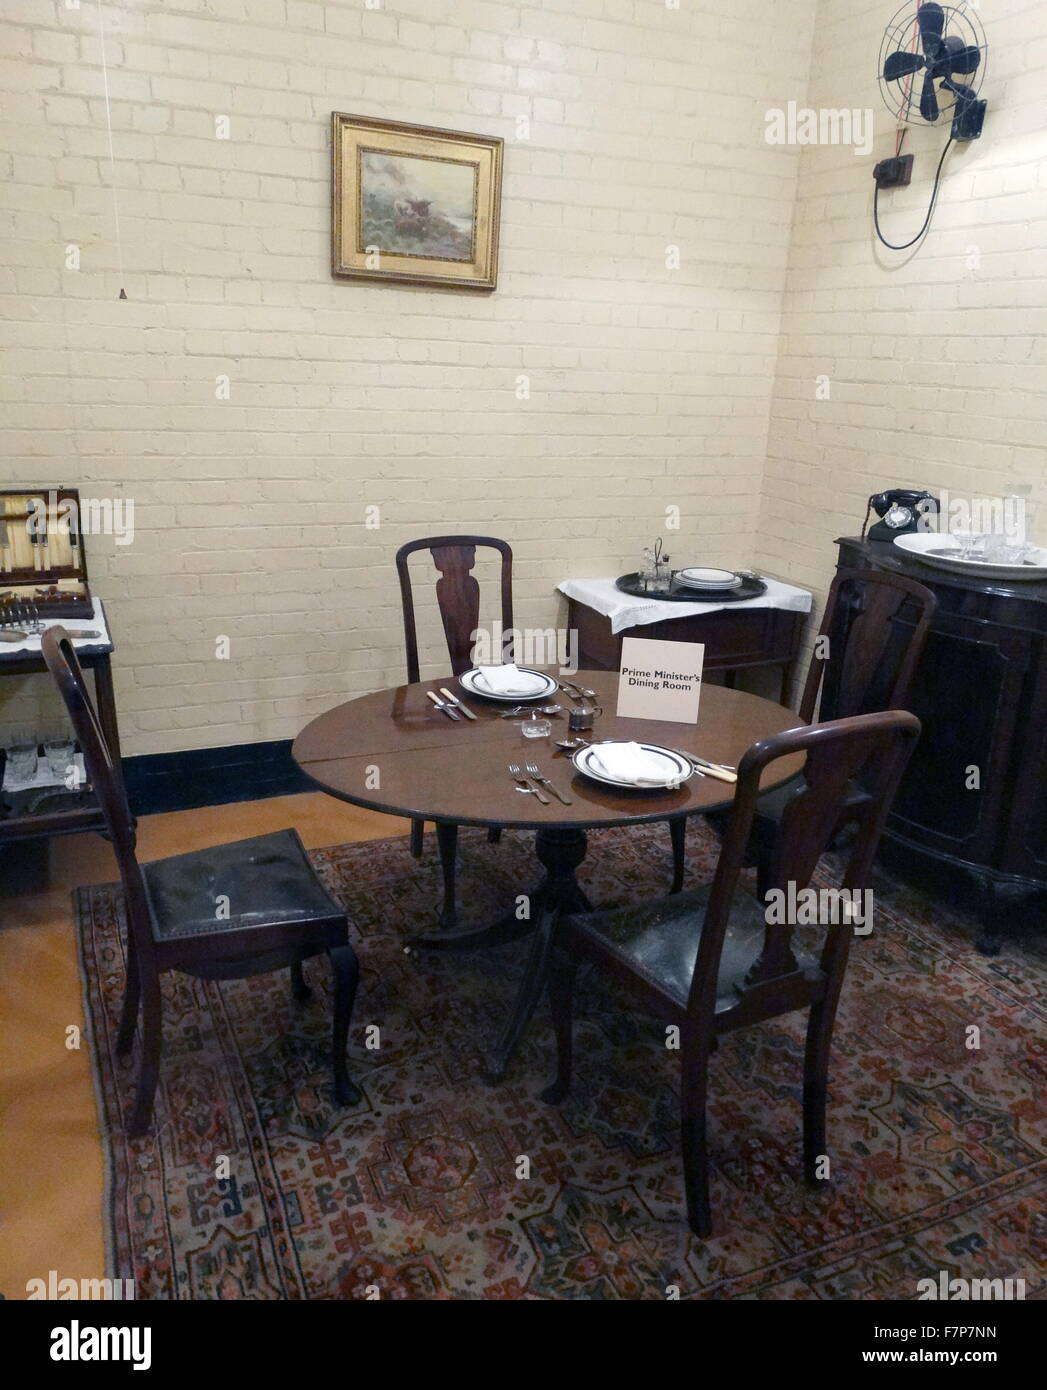 Winston Churchill's dining room in the Cabinet war rooms bunker, London; England. The War rooms were used by the British Government as protection for senior ministers during World war two. Stock Photo